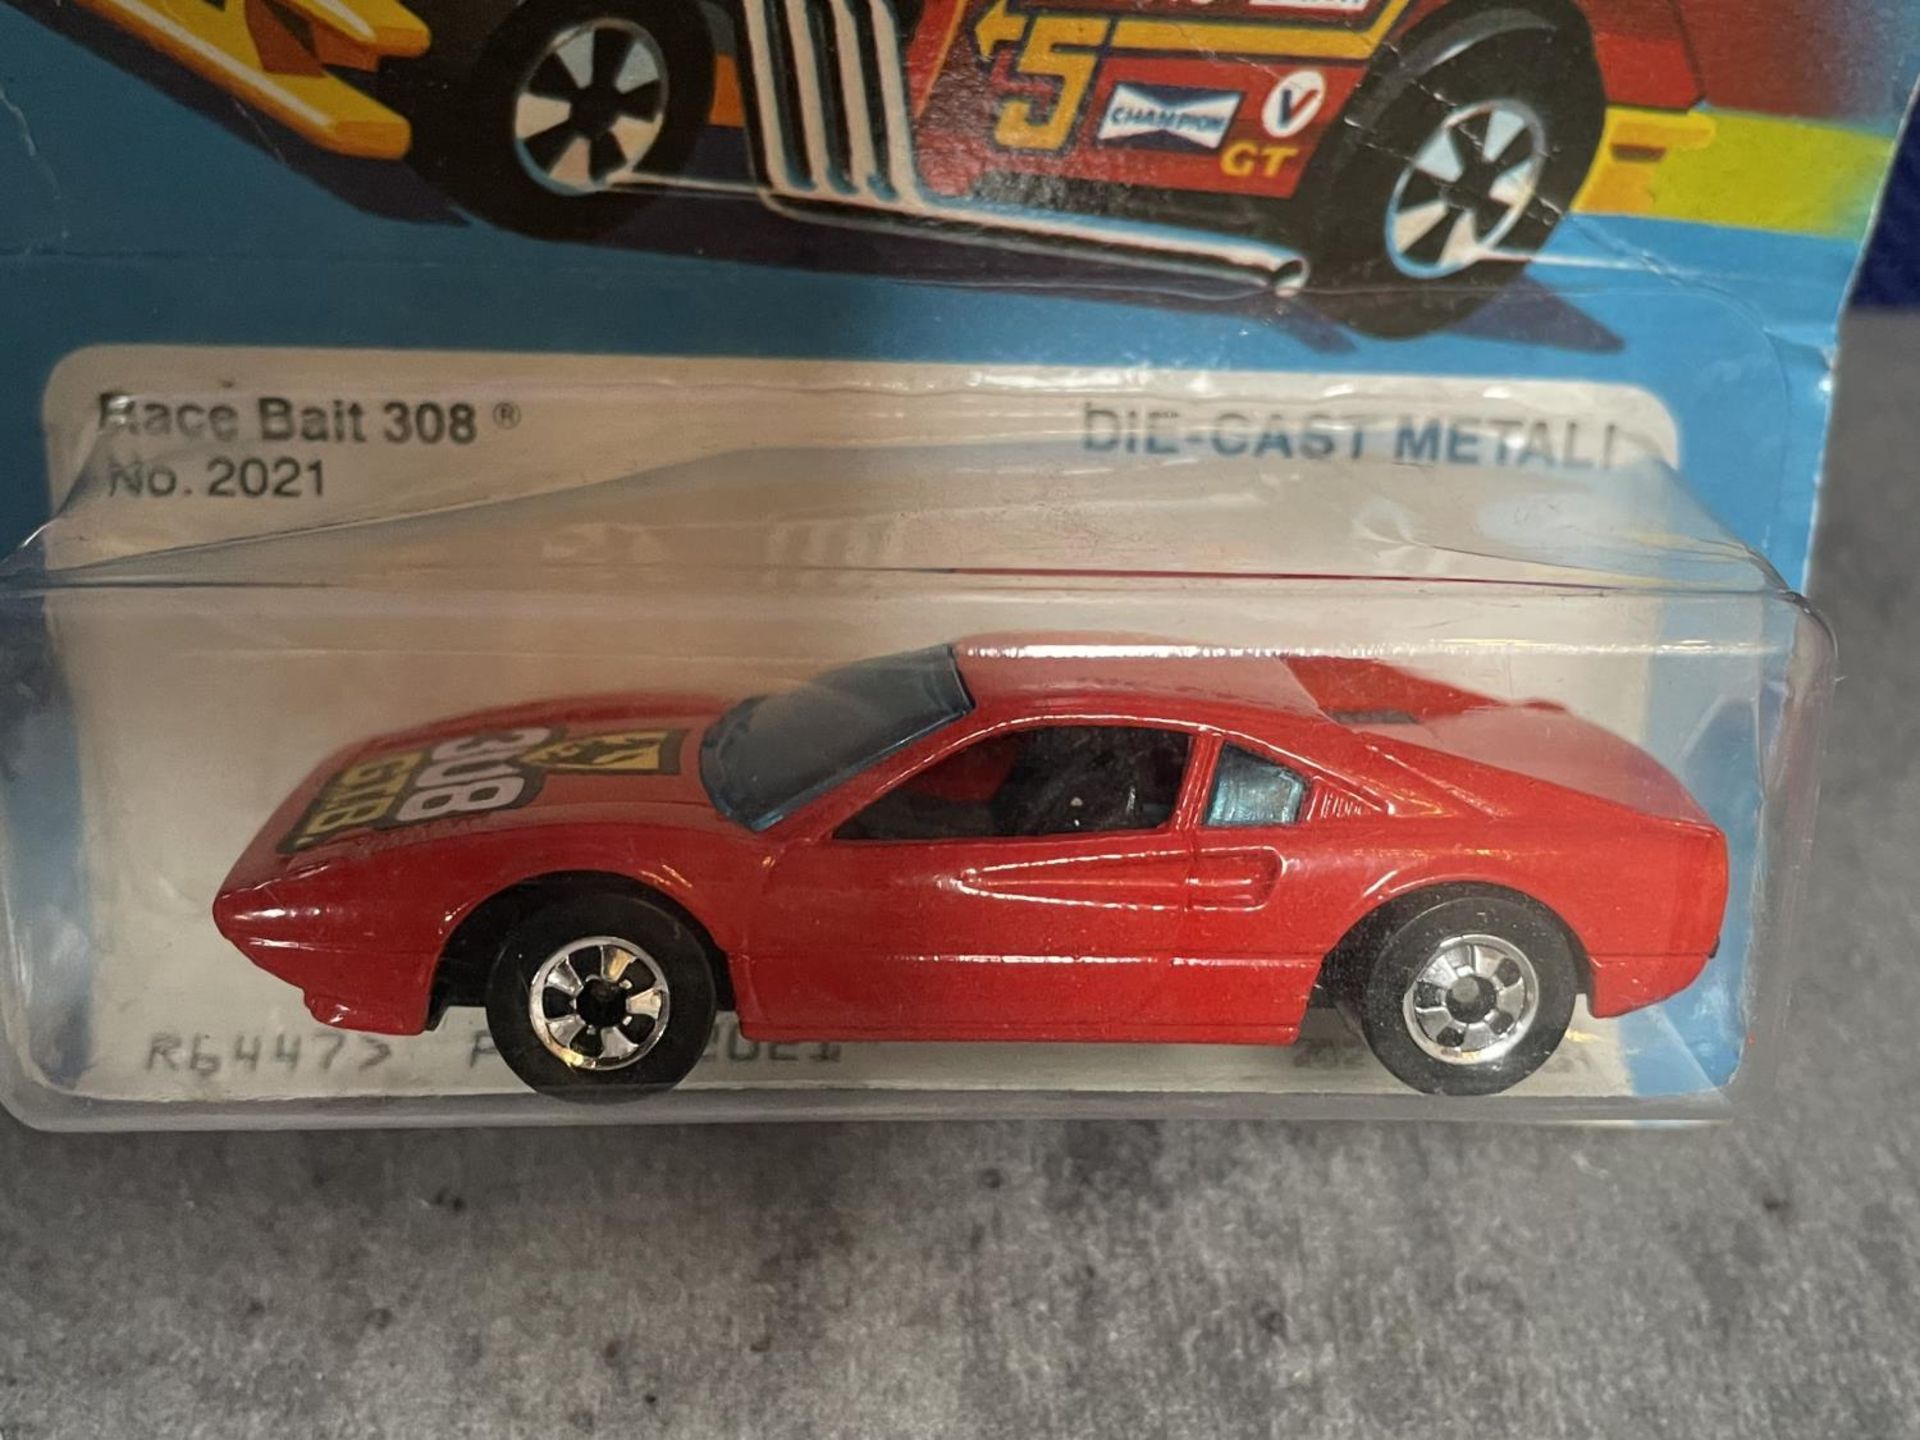 Vintage Hot Wheels Race Bait Diecast Carded Models Comprising Of 1 x Vintage Hot Wheels 2021 Race - Image 3 of 3